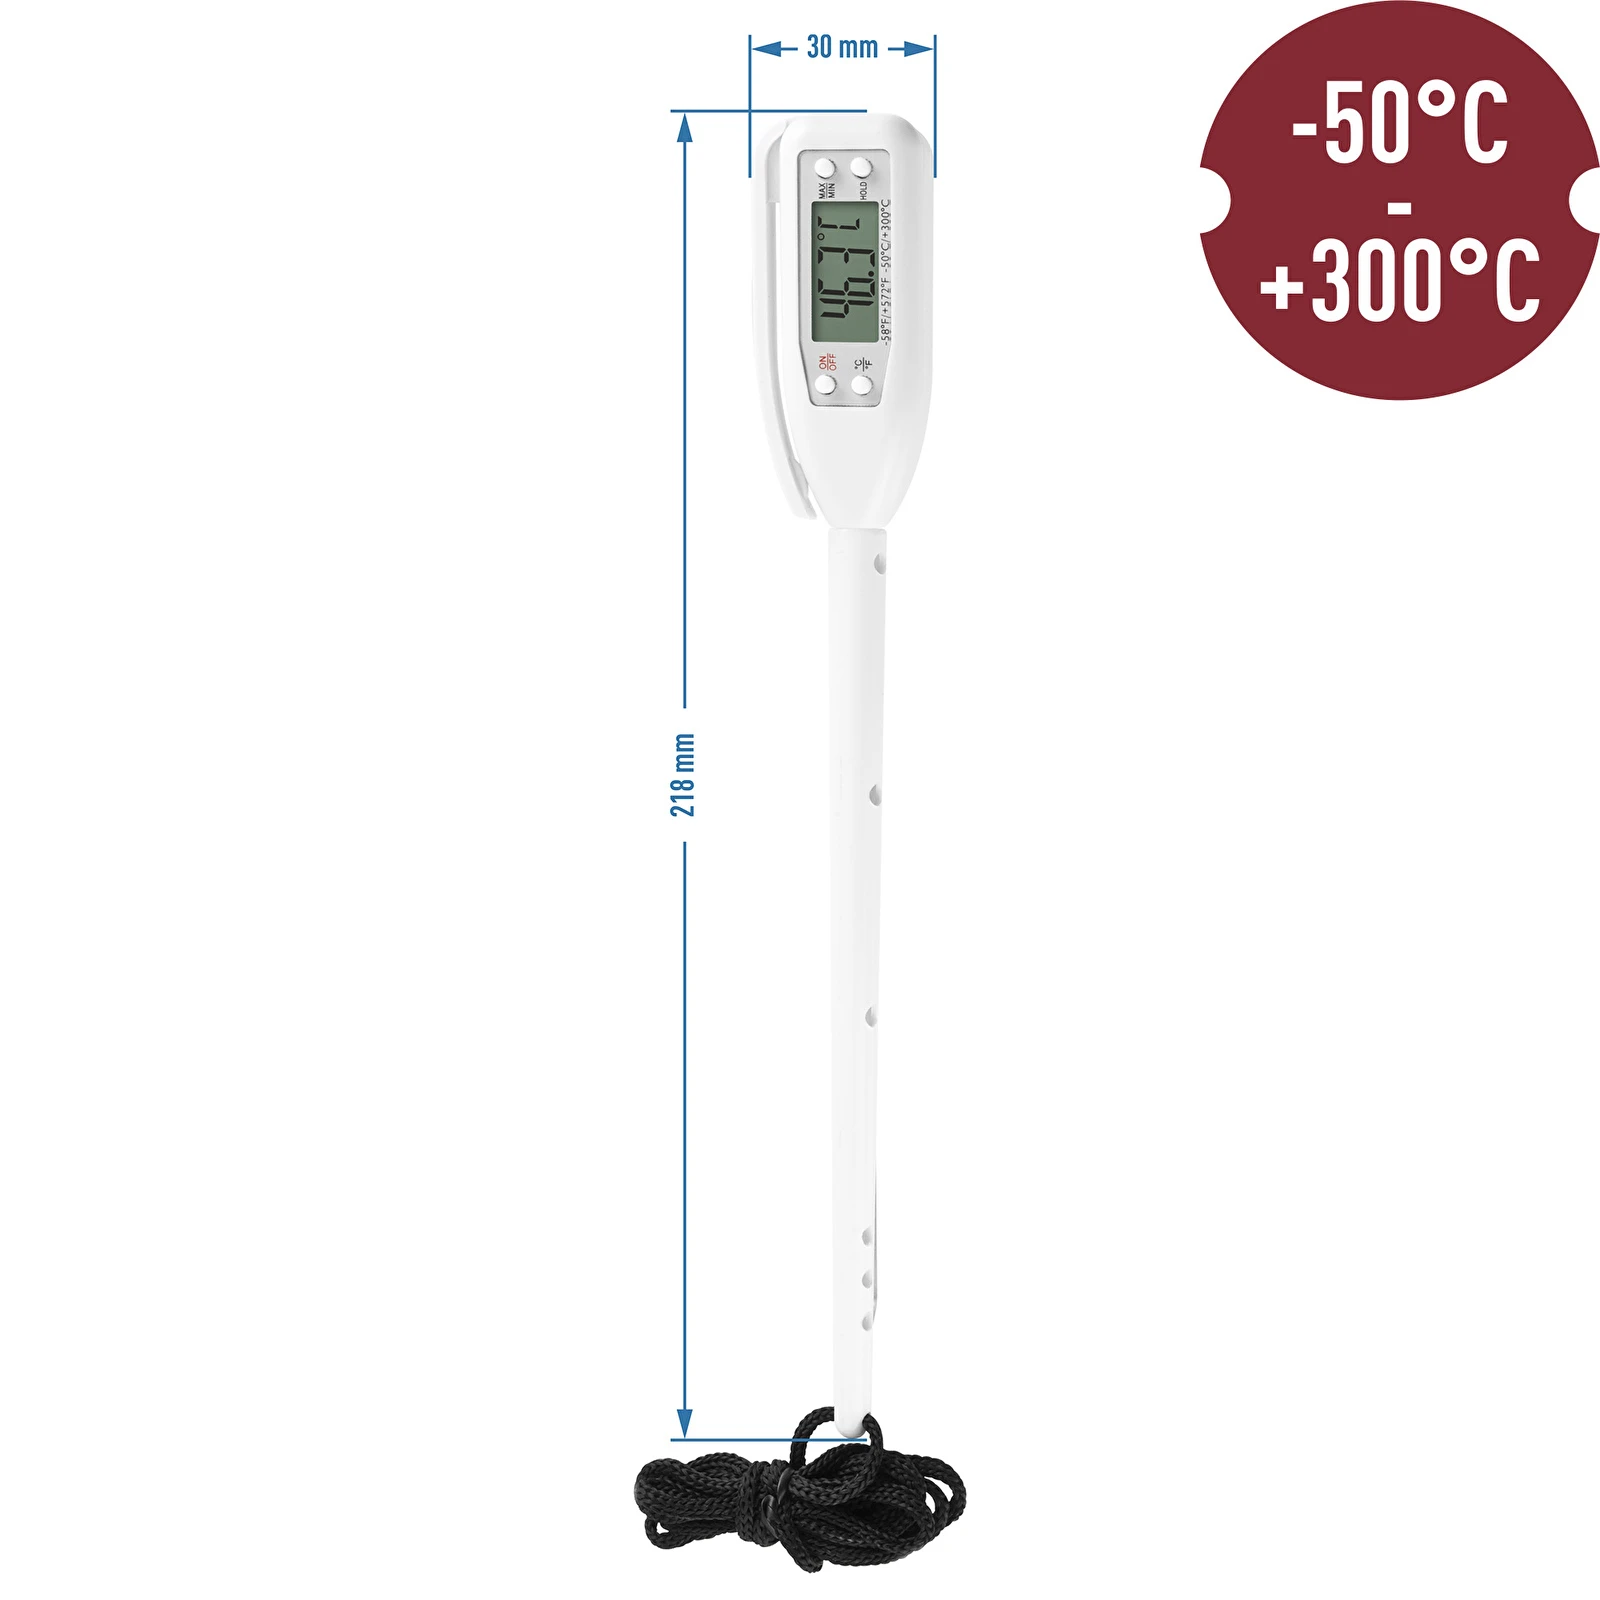 https://browin.com/static/images/1600/professional-food-thermometer-50-c-300-c-185002_wym.webp